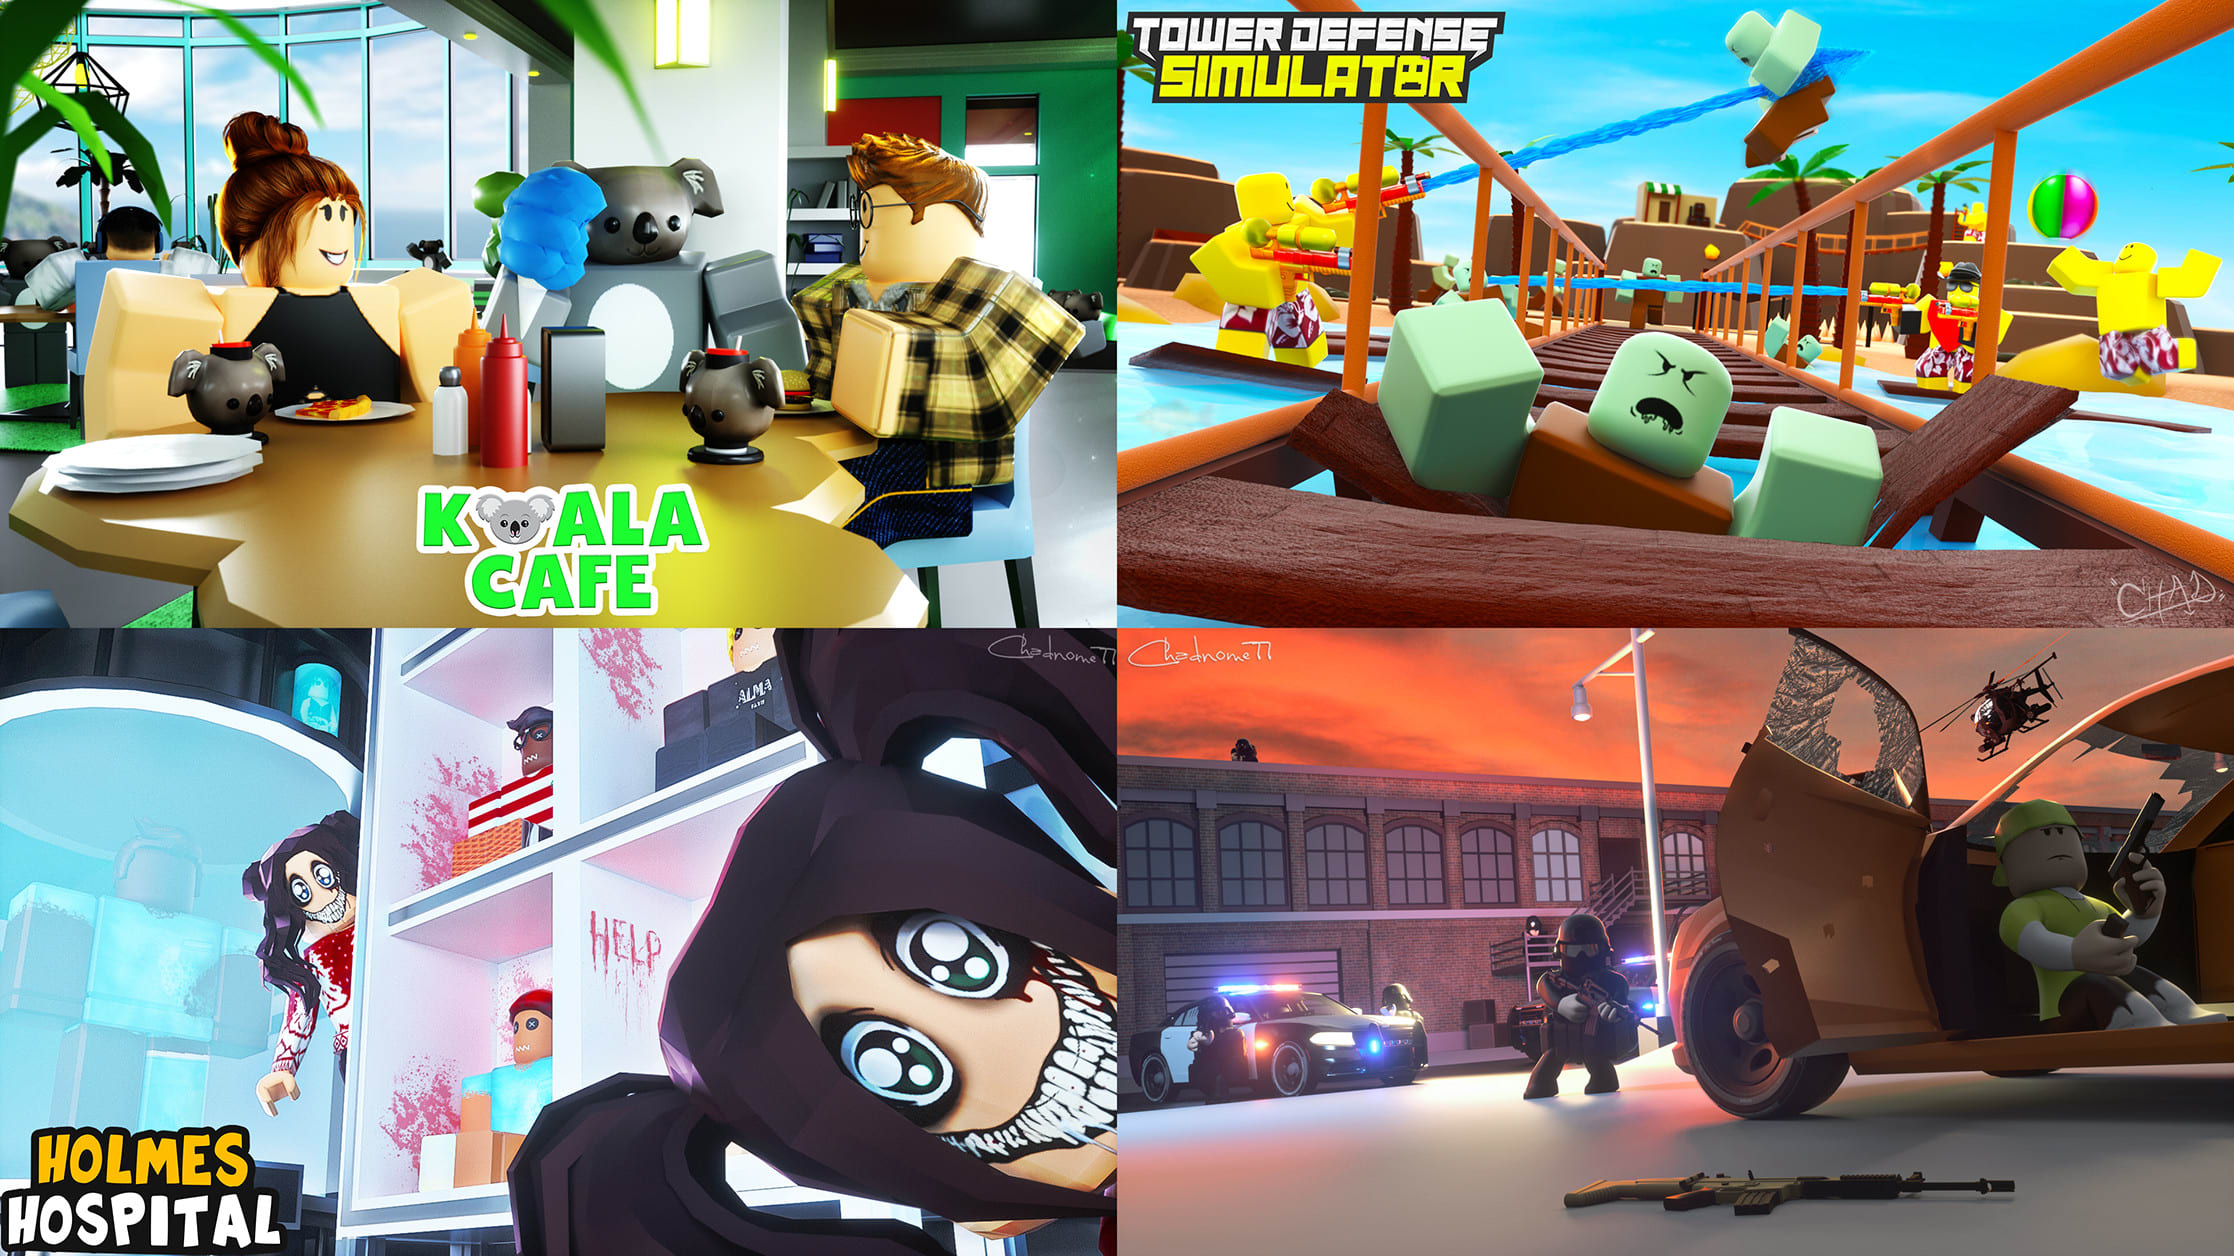 Make You High Quality Gfx For Your Game Or Group By Chadnome77 - new koala cafe roblox